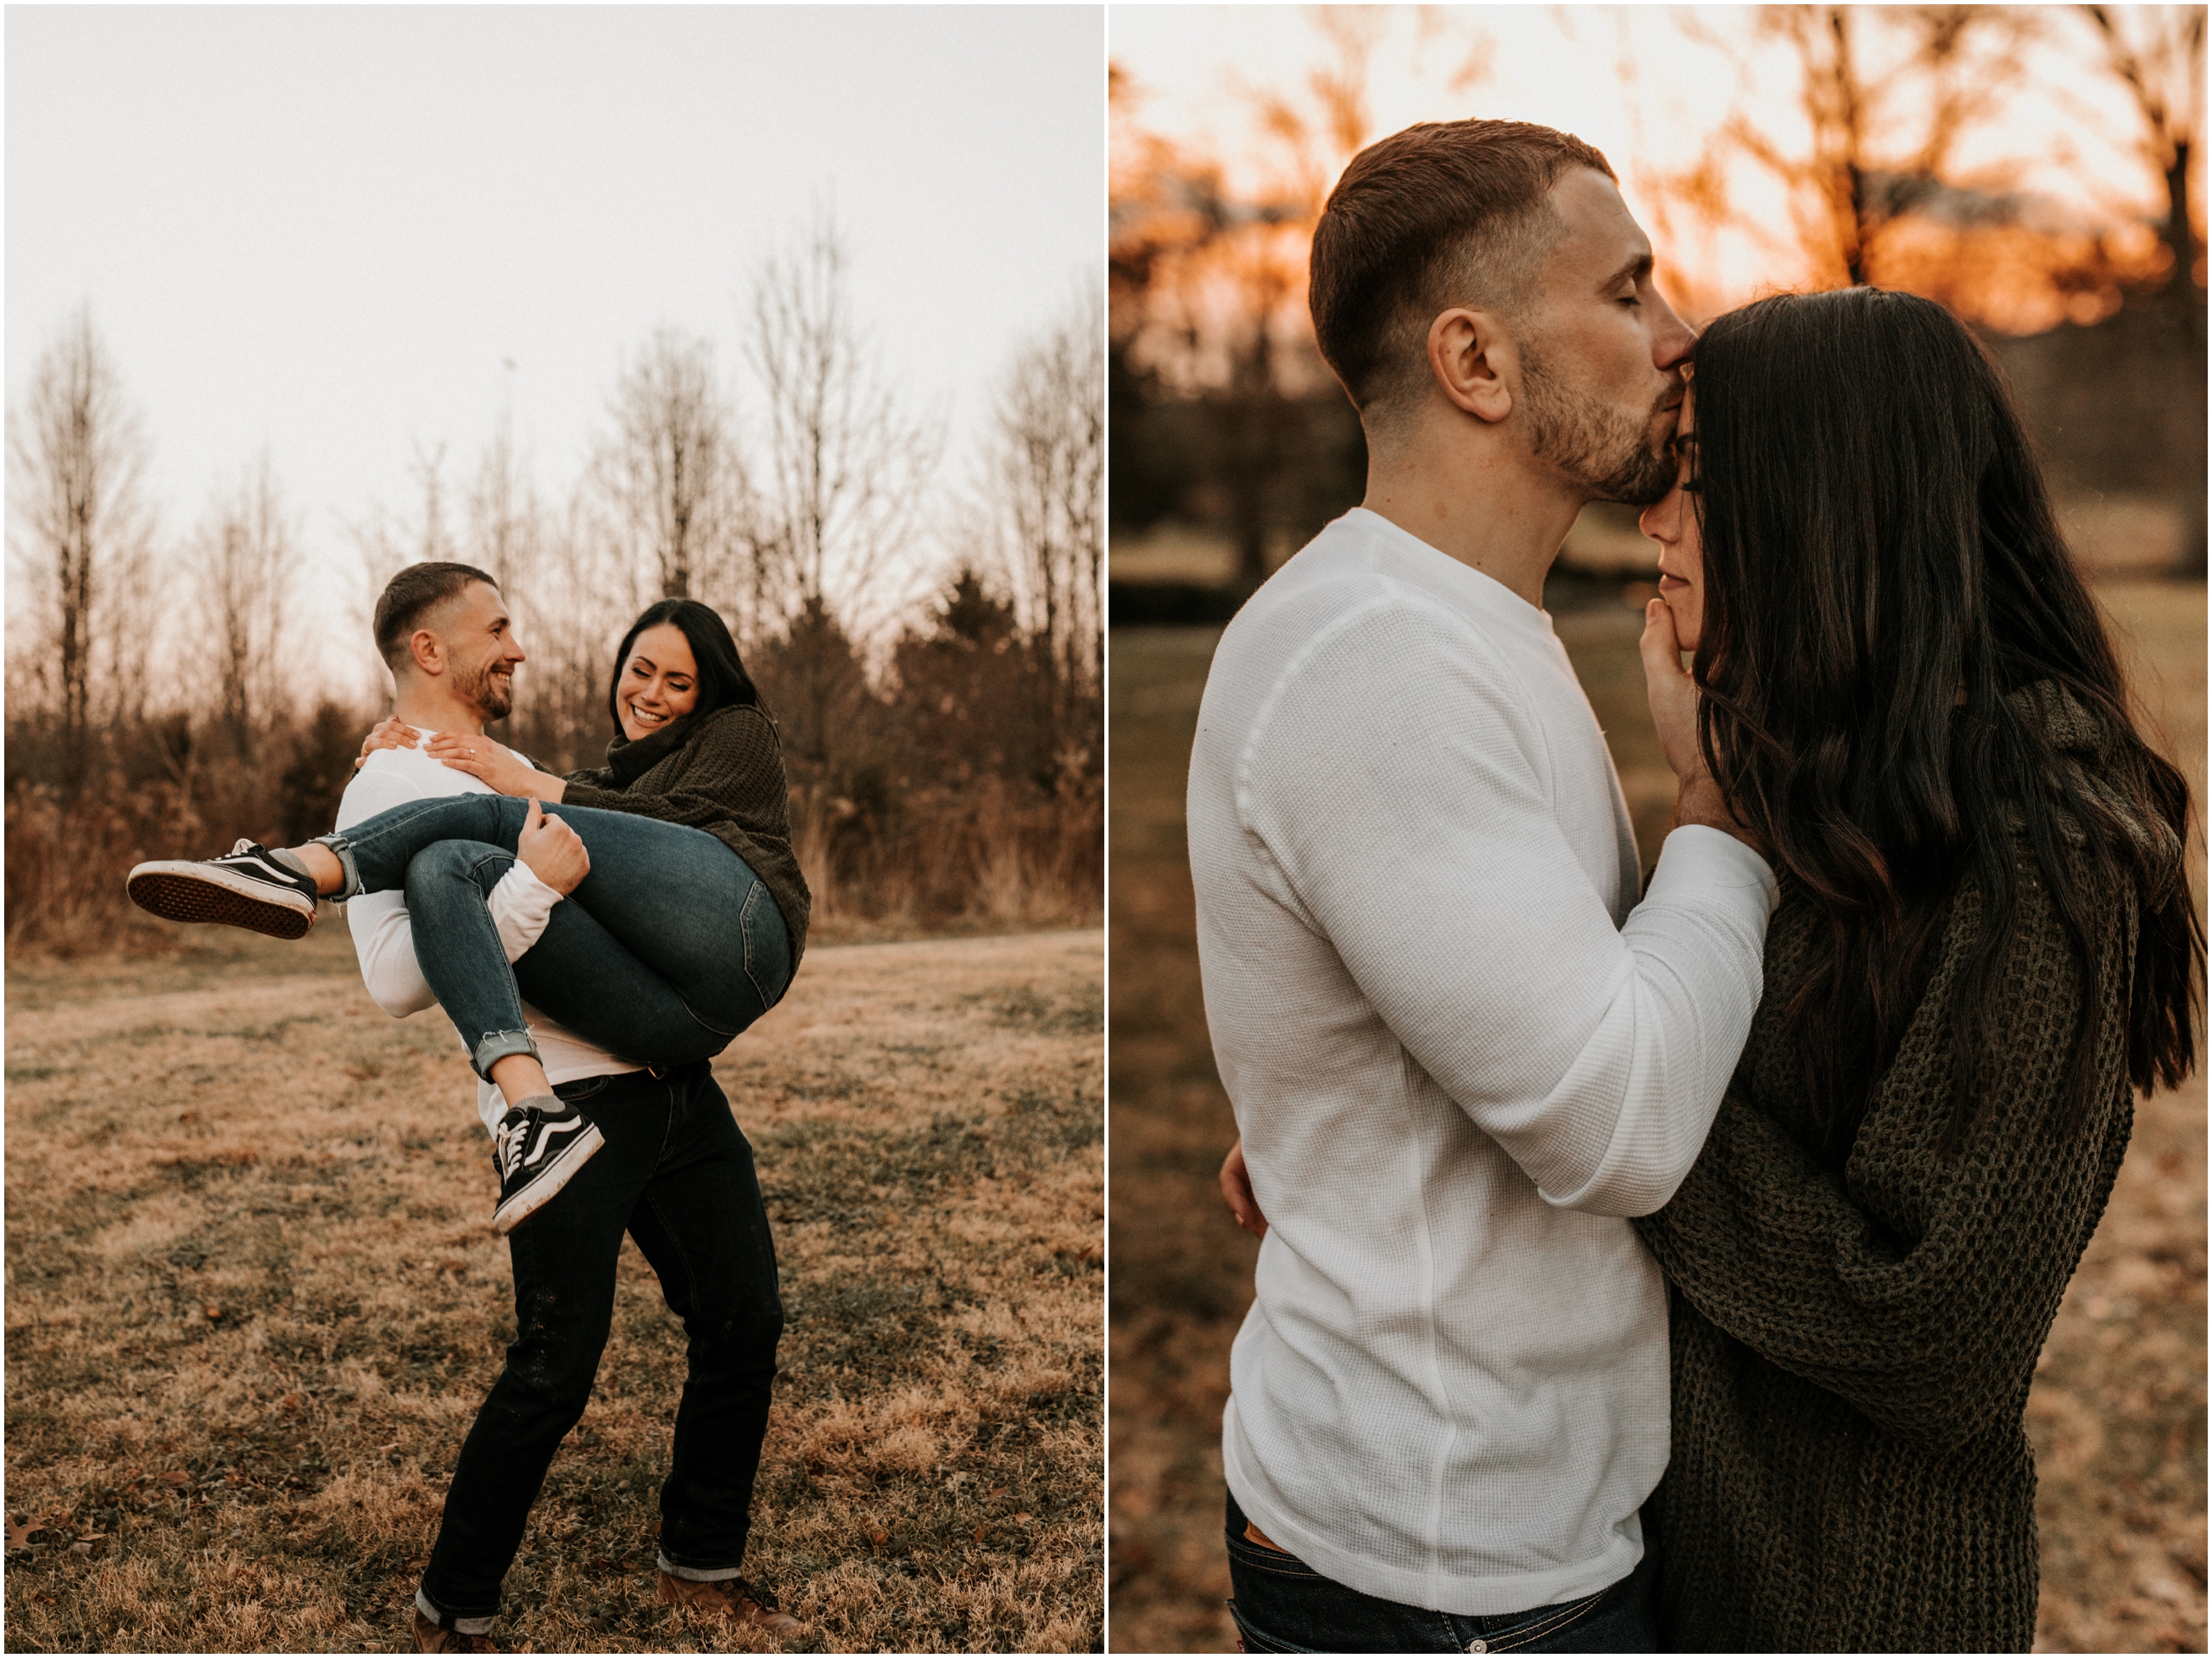 Stone Cottage Barn New Hope PA In Home Engagement Session Cozy Winter Christmas Holiday NJ Wedding Photographer